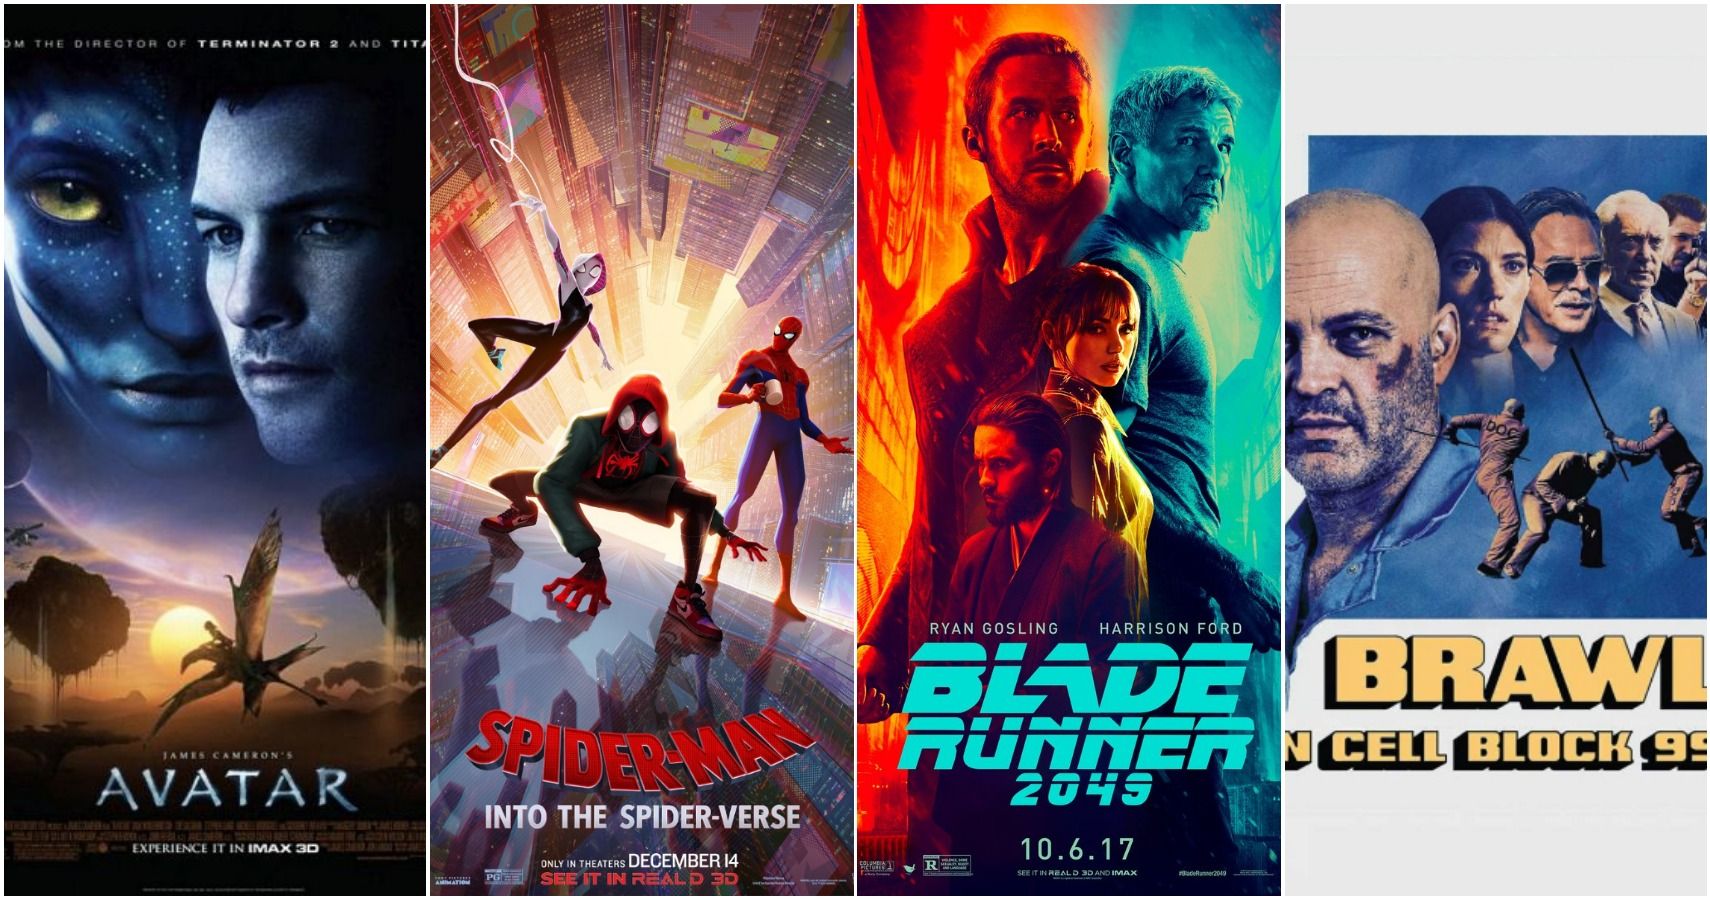 5 Movie Poster Trends That Need To Stop (& 5 We Need More Of)